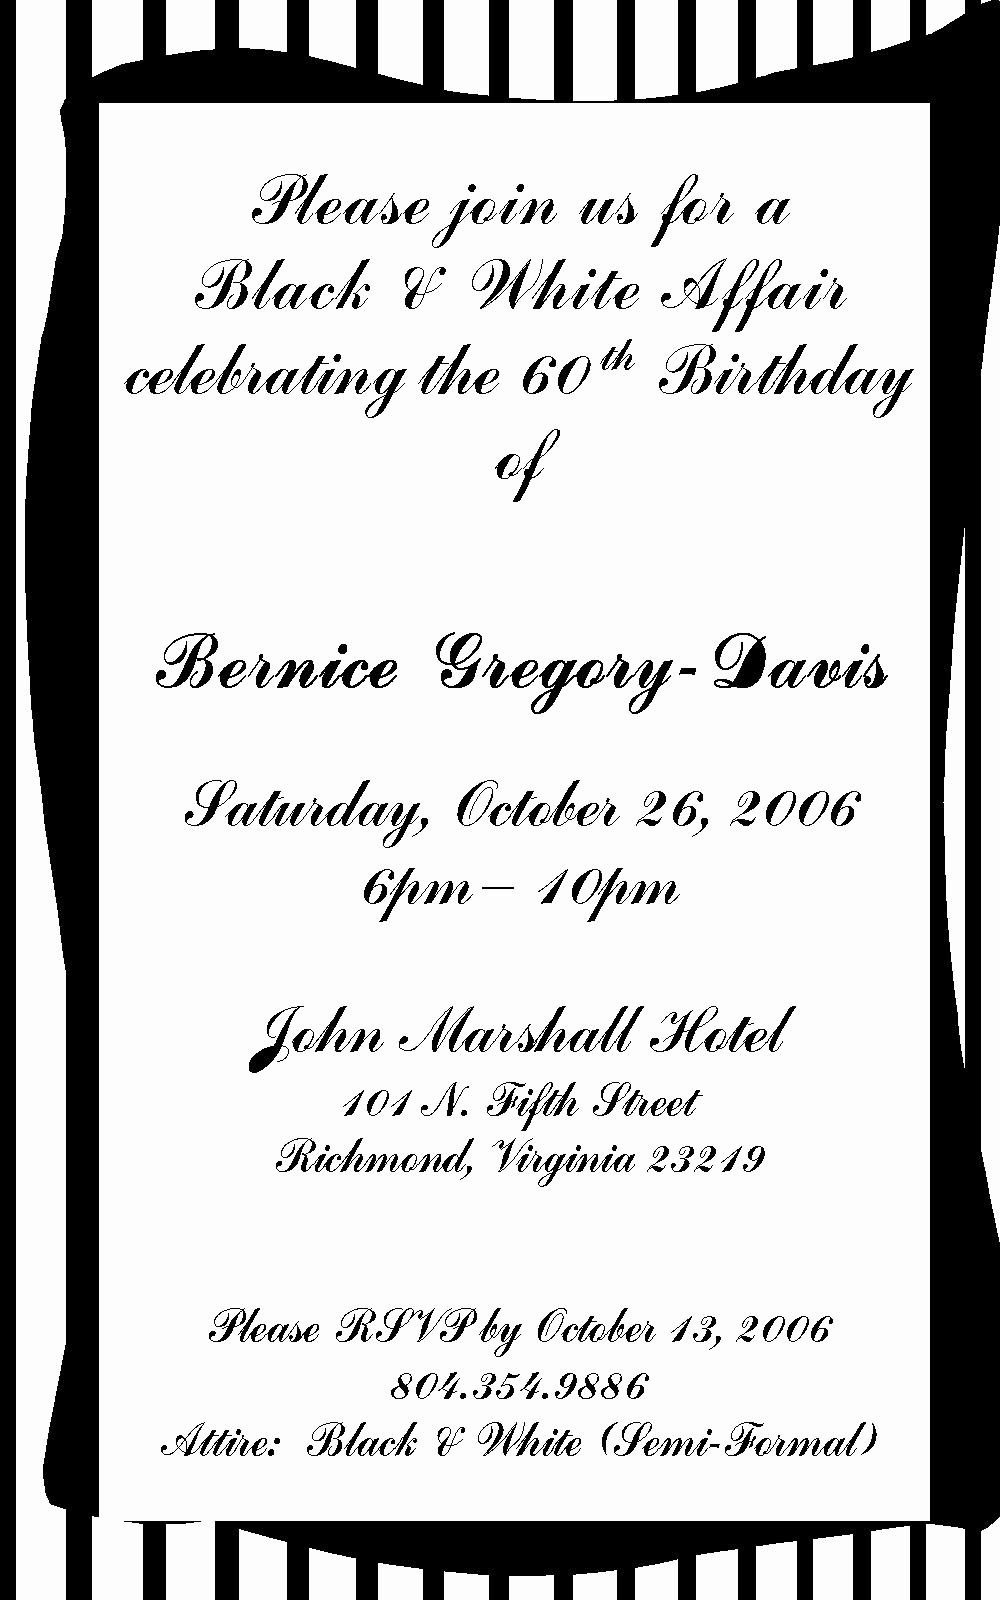 1st Birthday Invitation Wording Samples Awesome 1st Birthday Invitation Wording Samples — Birthday